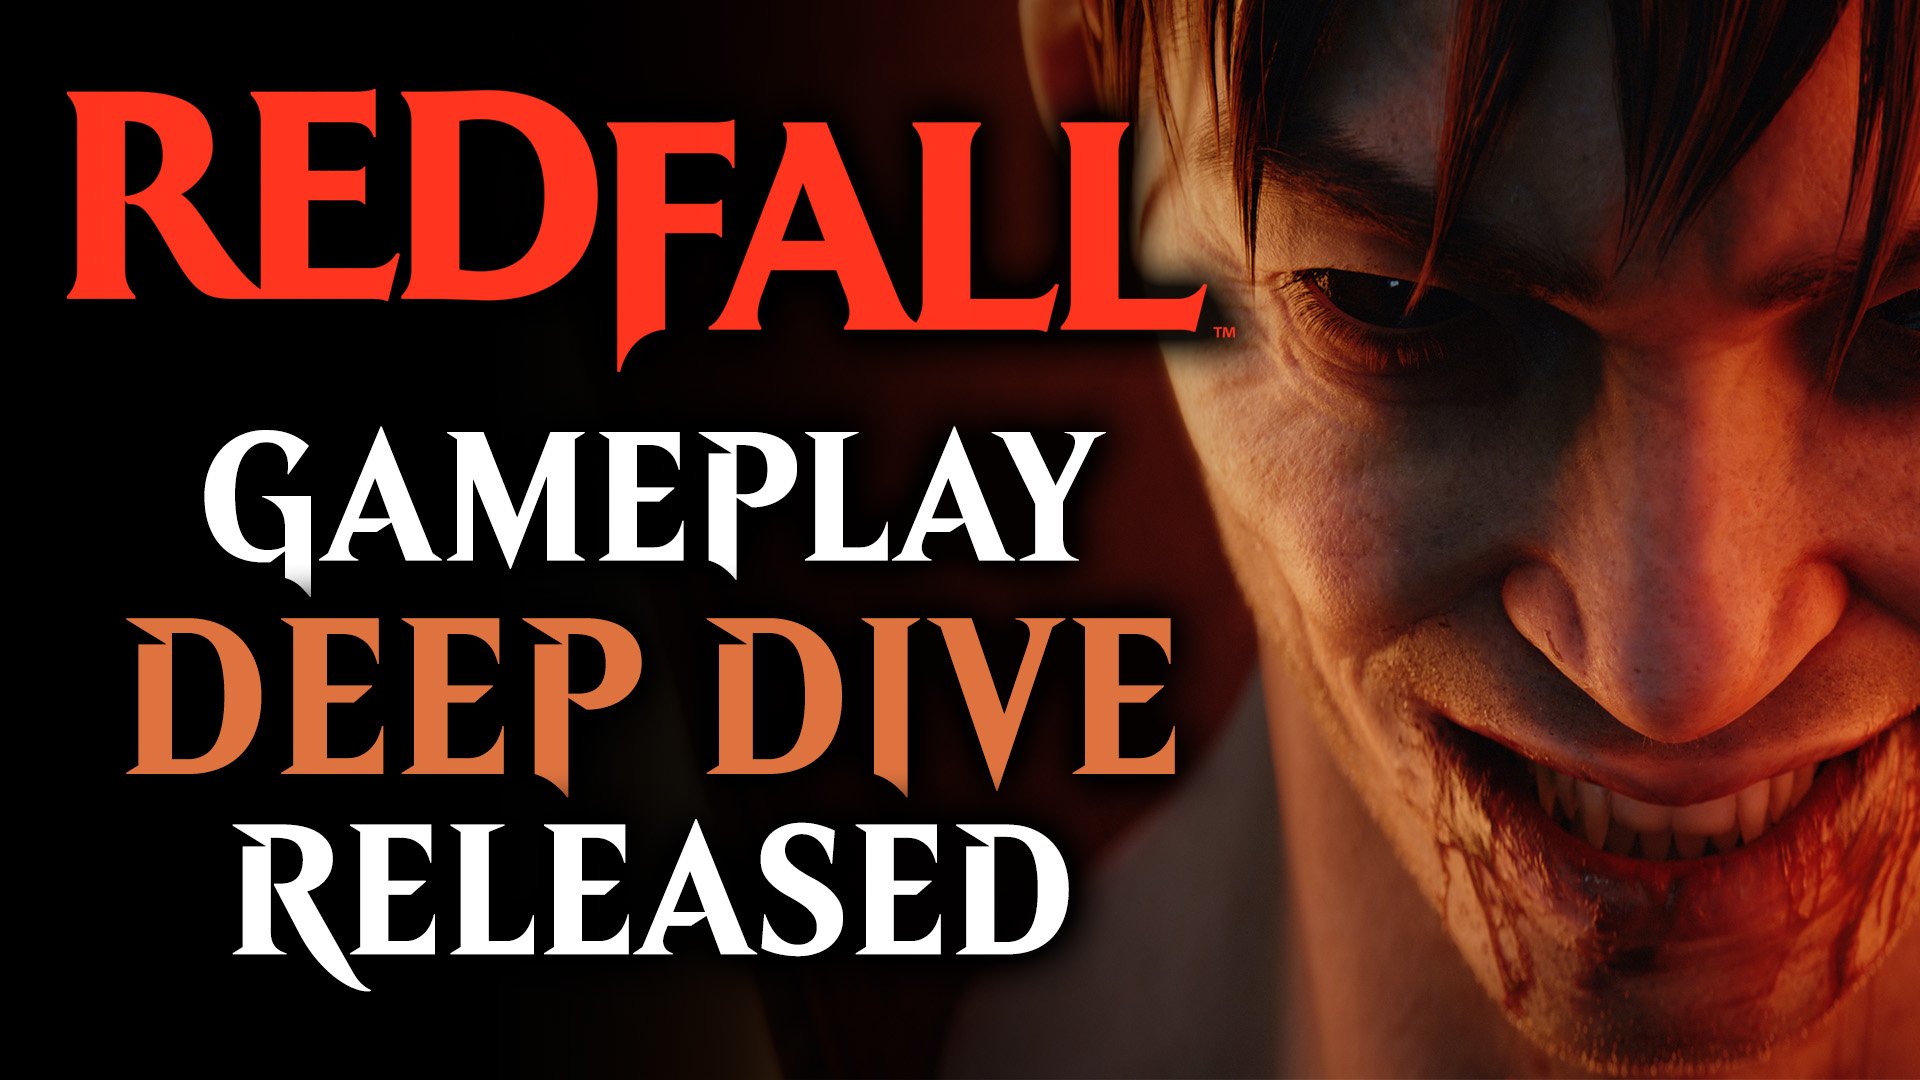 Redfall Gets Five Minutes of Vampire-Slaying Gameplay